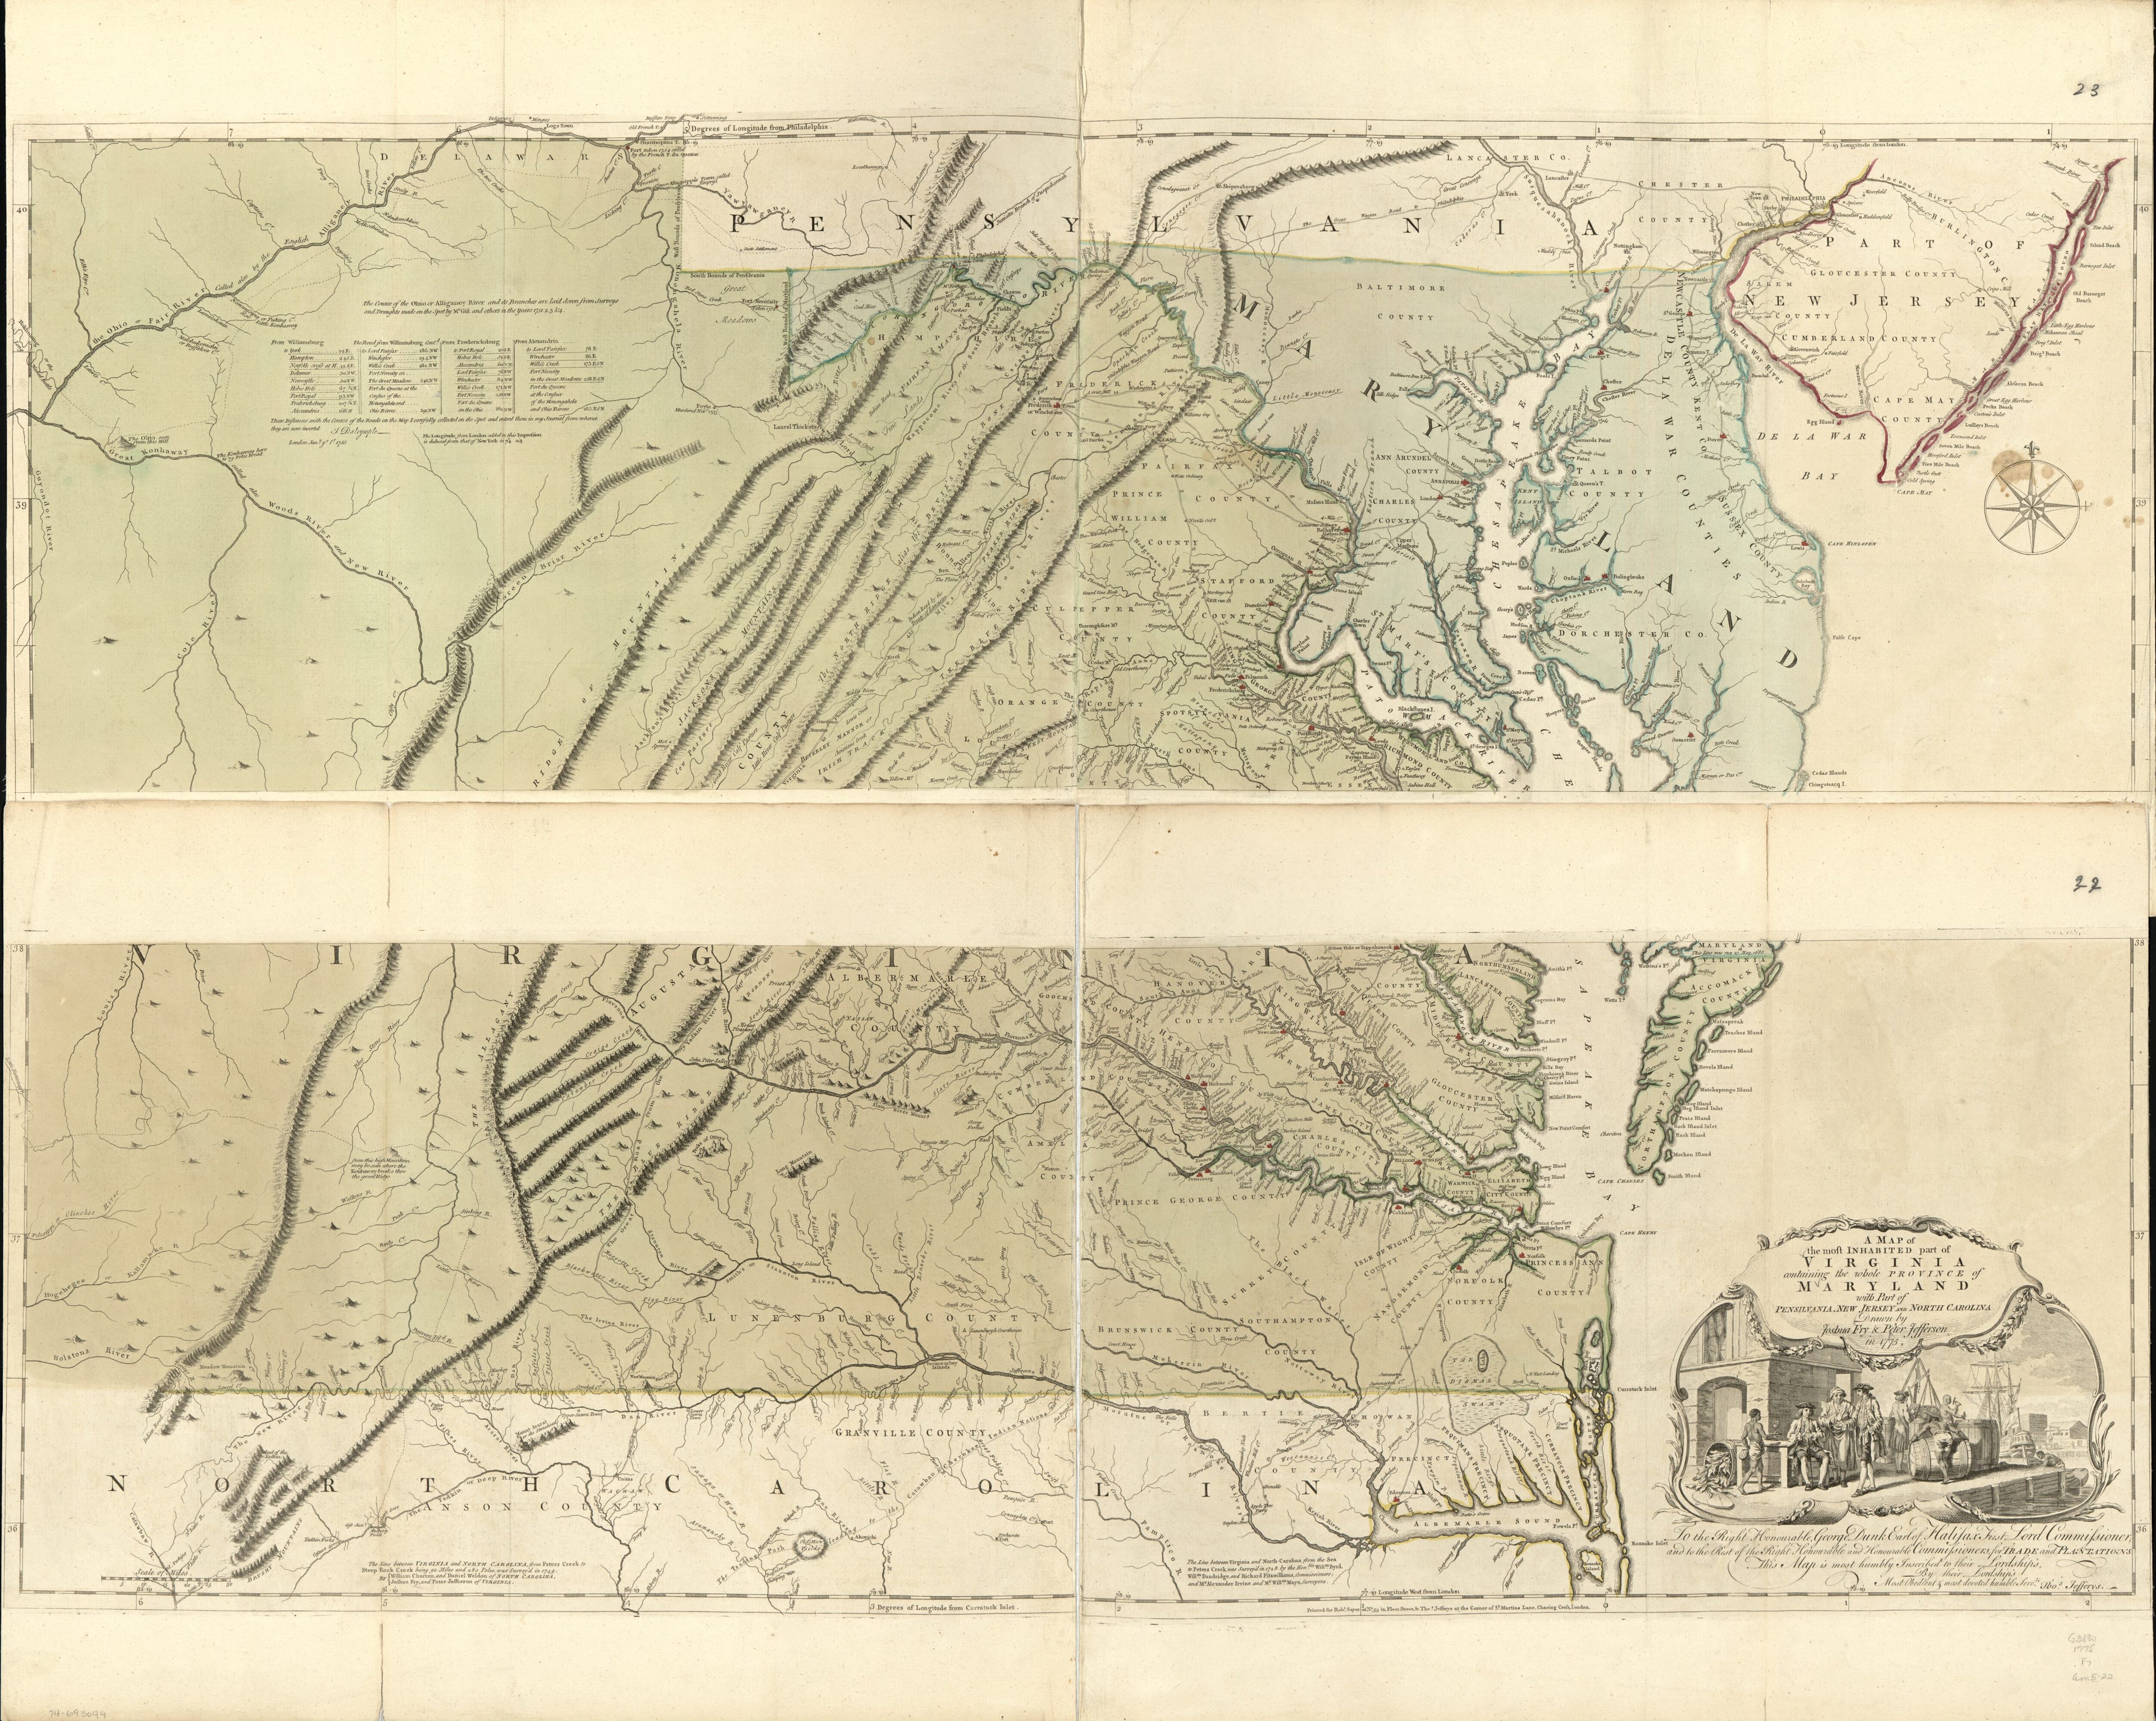 This old map of A Map of the Most Inhabited Part of Virginia Containing the Whole Province of Maryland With Part of Pensilvania, New Jersey and North Carolina from 1775 was created by Joshua Fry, Peter Jefferson, Thomas Jefferys, Robert Sayer in 1775